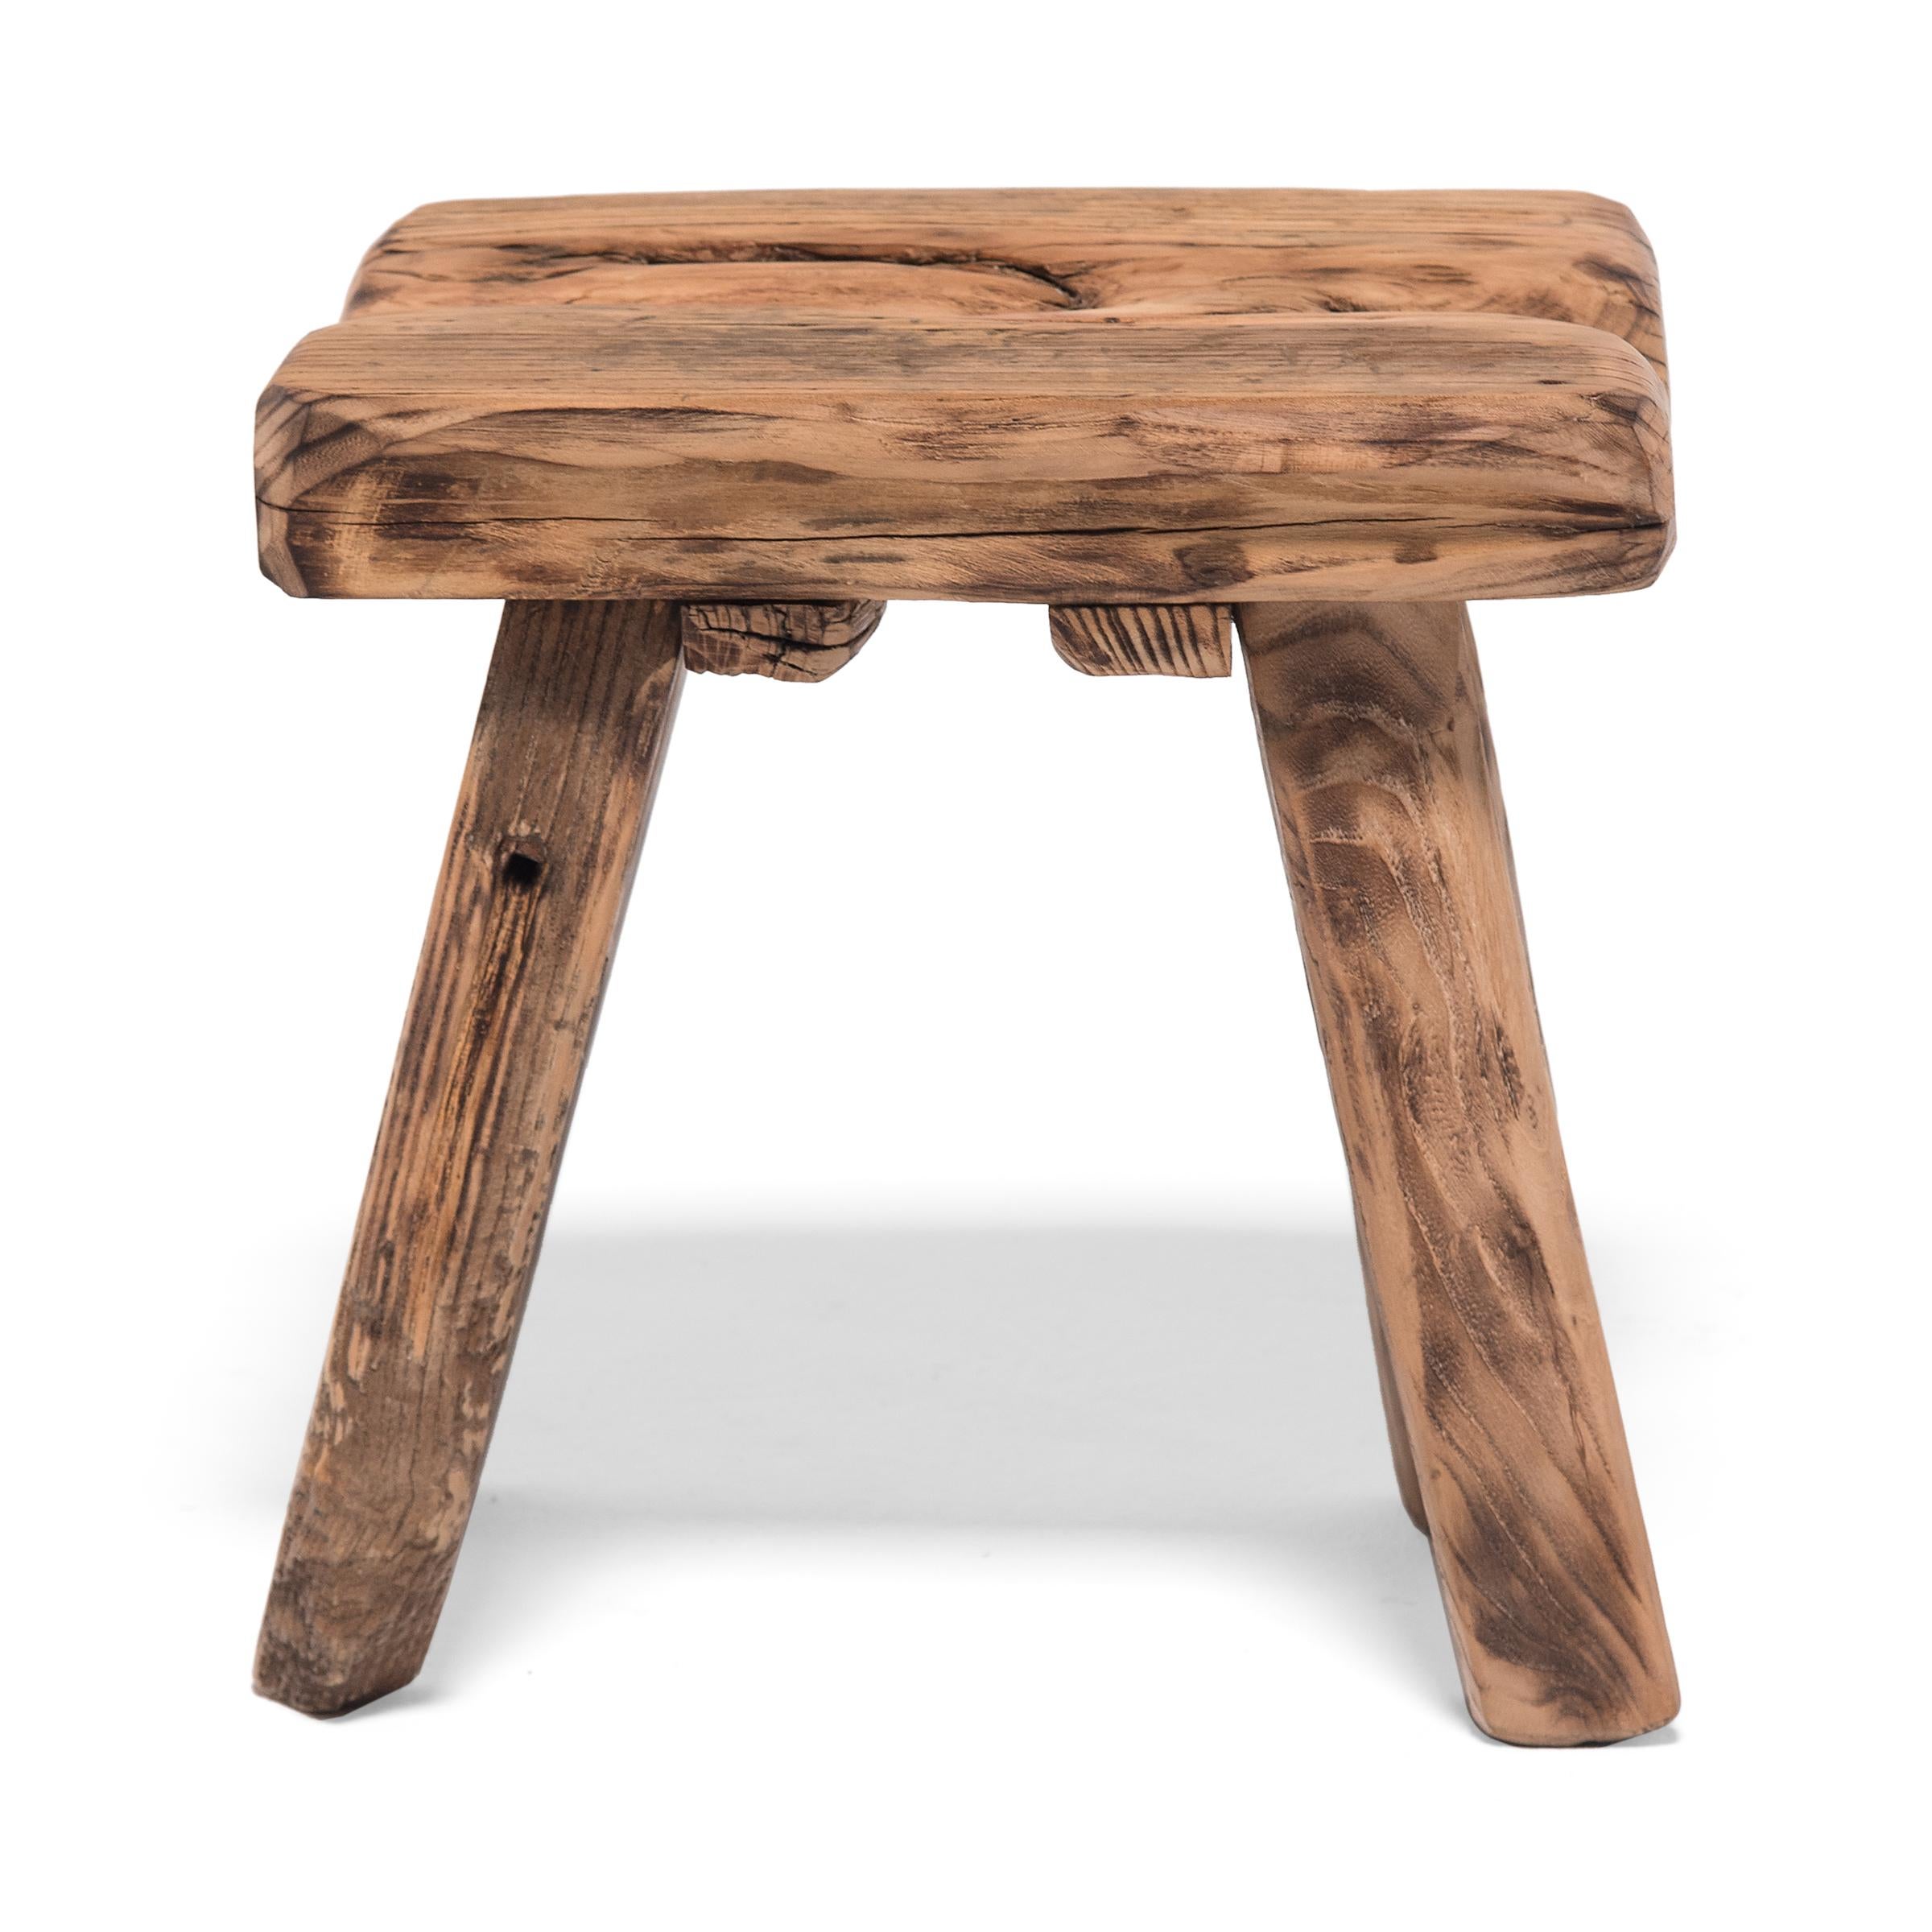 Crafted of wood reclaimed from 18th century Chinese buildings, this contemporary four-leg stool is the epitome of farmhouse modern. Embracing the notion of “wabi-sabi,” the little stool charms with its irregular edges and array of knots, splits, and